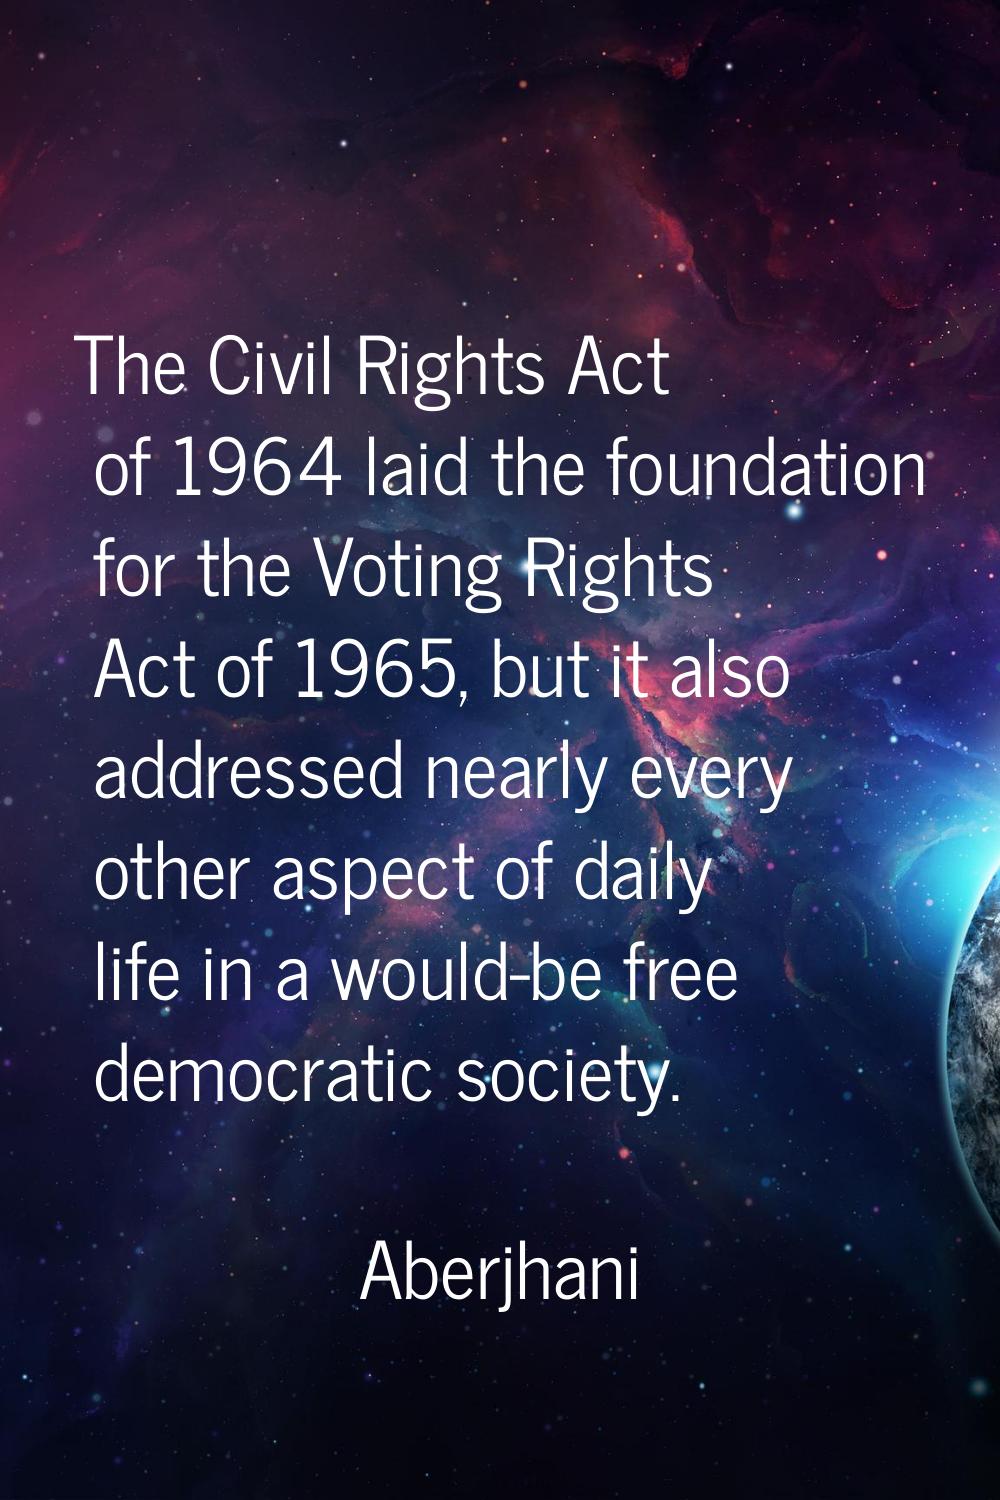 The Civil Rights Act of 1964 laid the foundation for the Voting Rights Act of 1965, but it also add